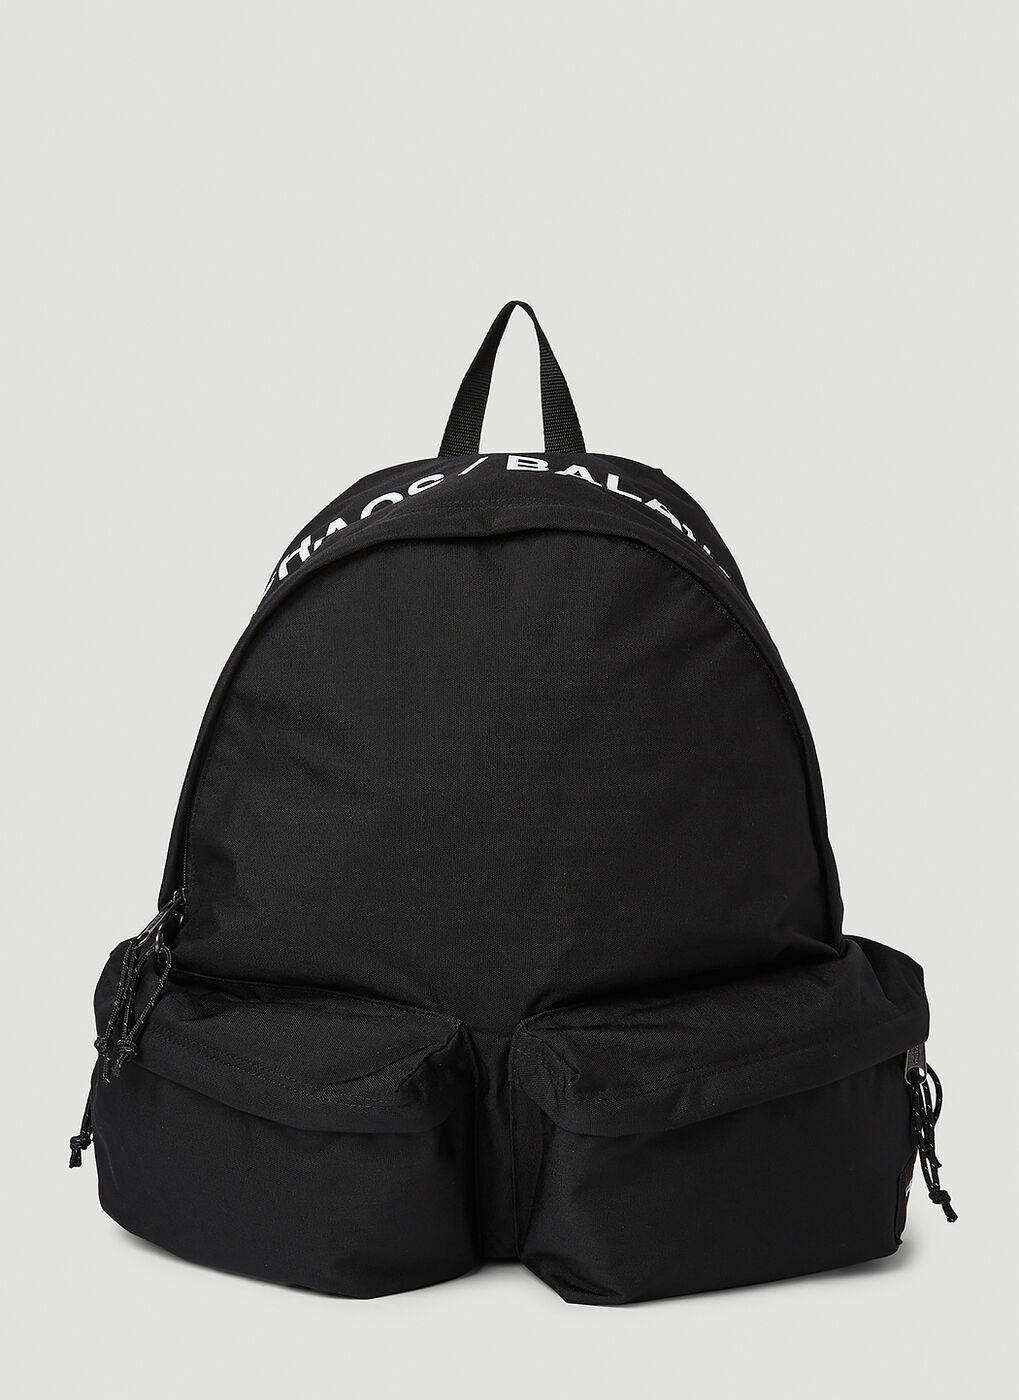 Eastpak x UNDERCOVER - Chaos Balance Backpack in Black Undercover